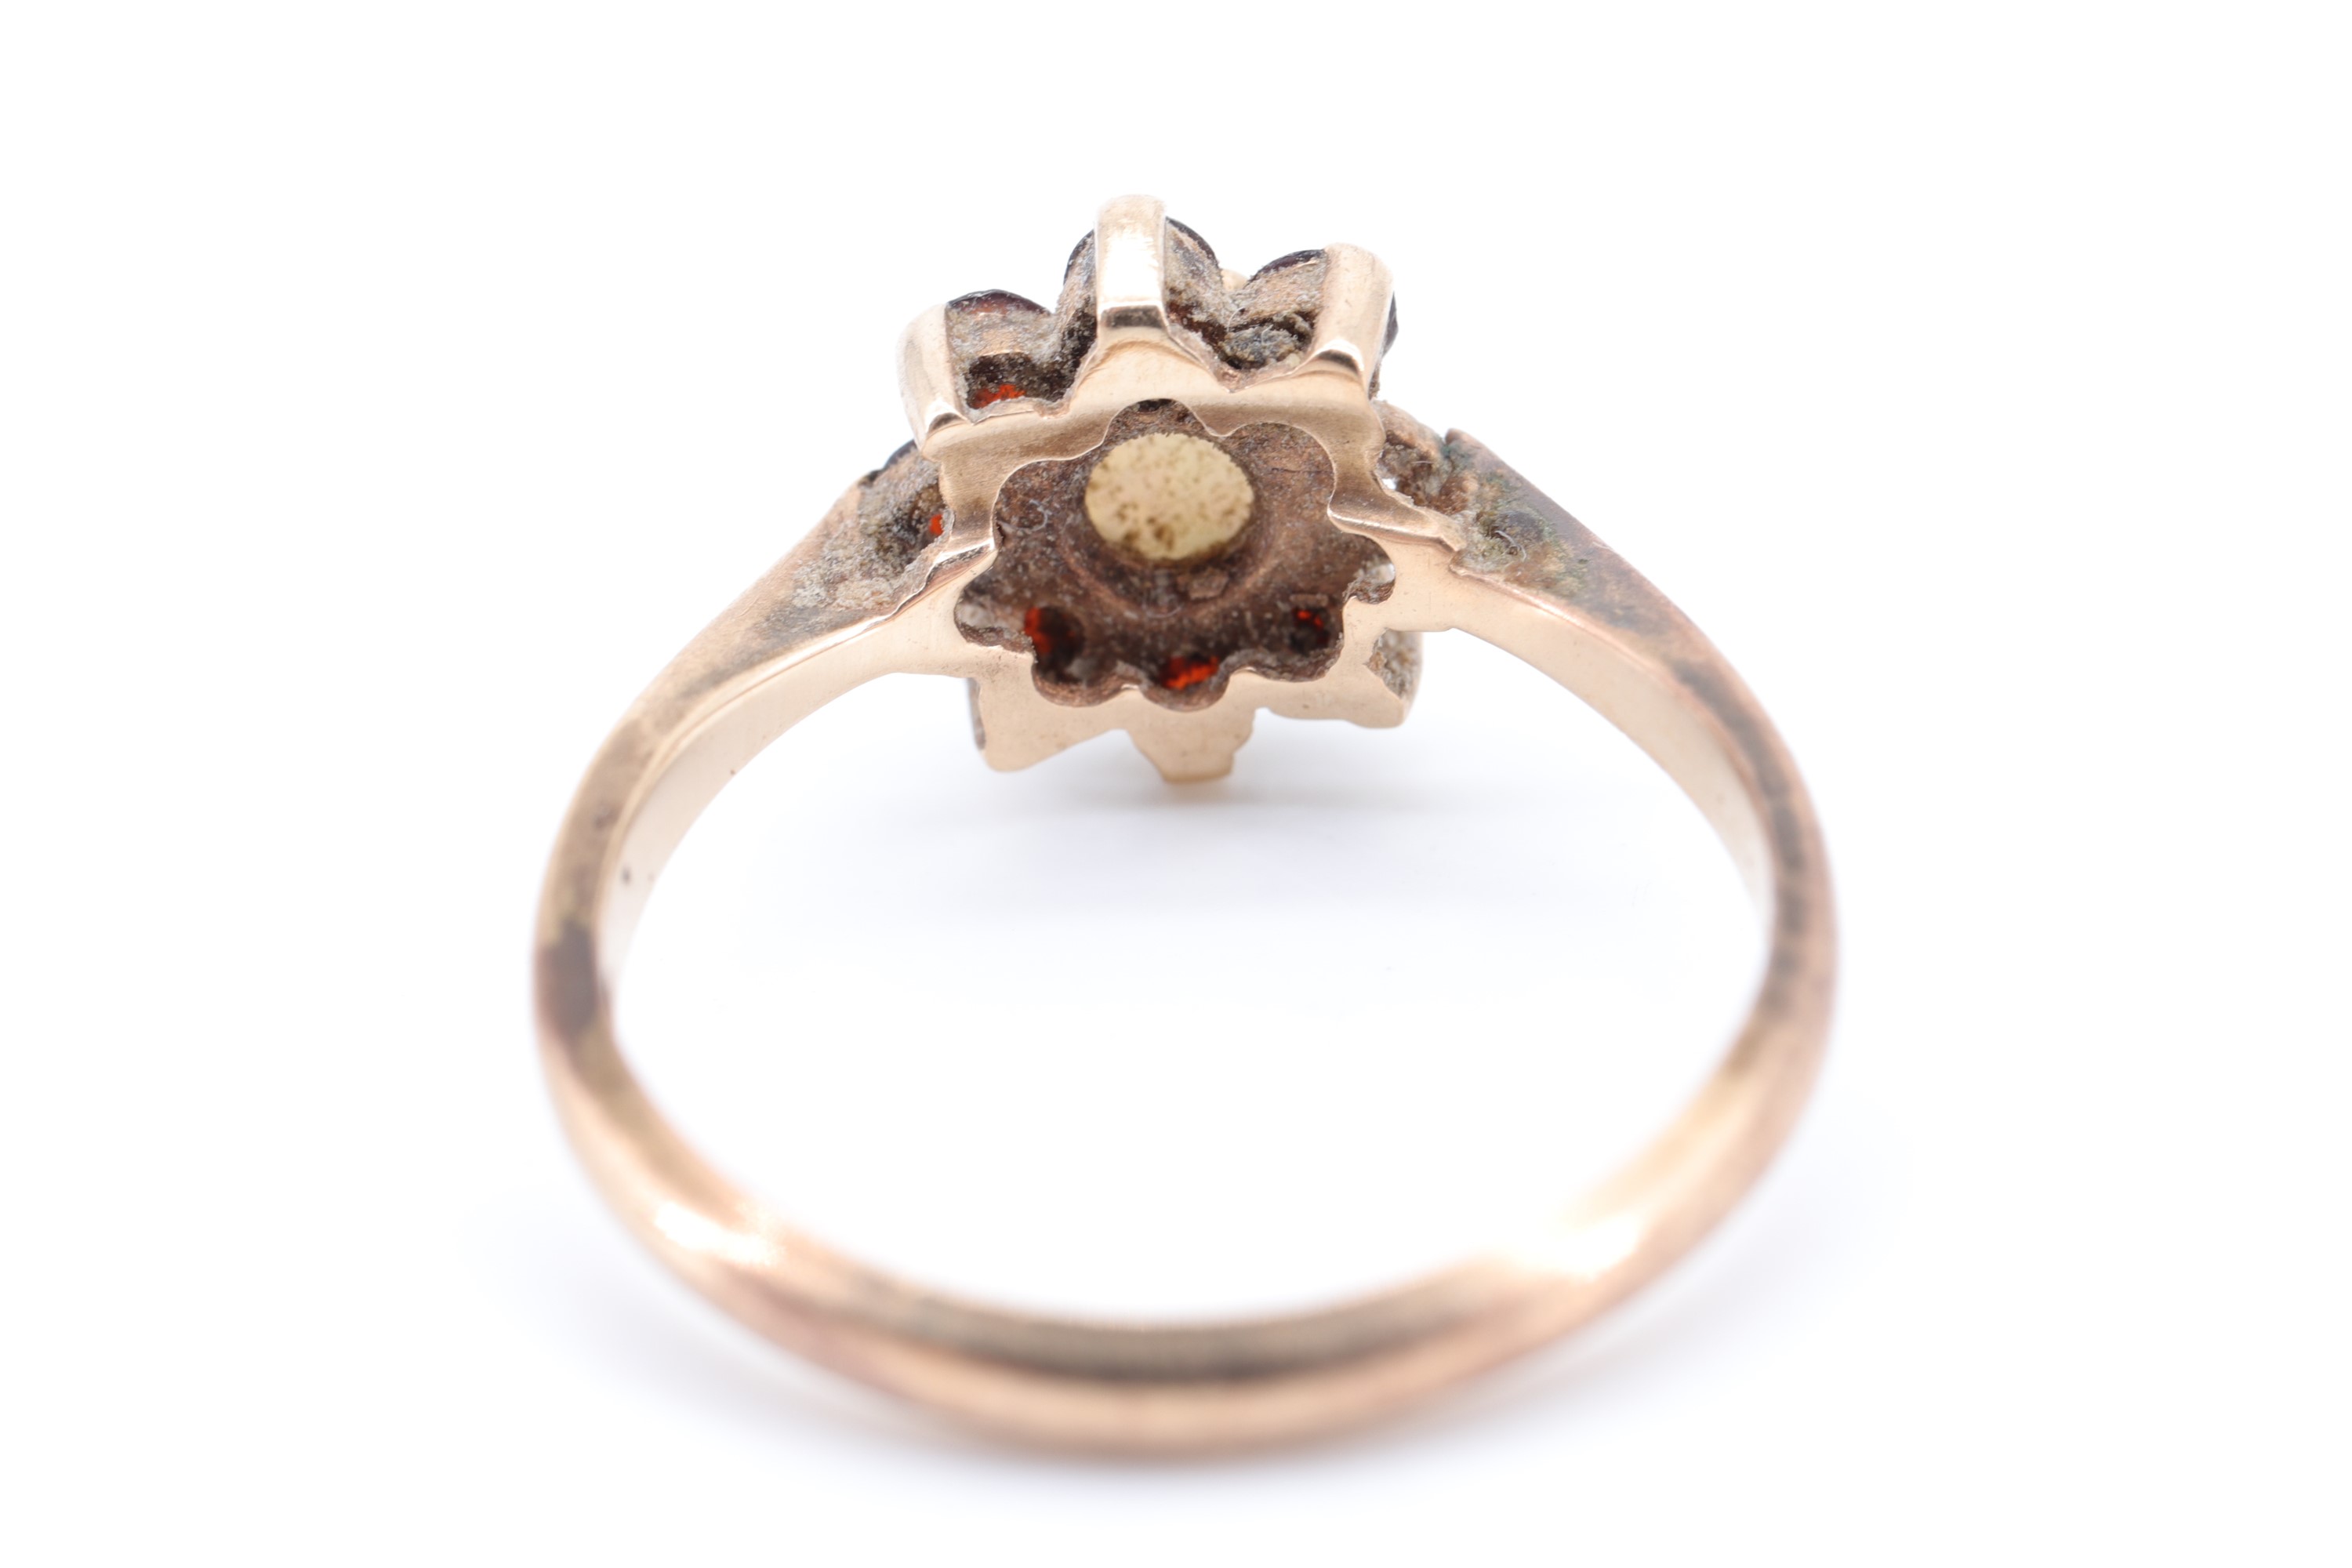 An opal and garnet flowerhead cluster ring, the opal cabochon of 5 mm diameter, set on 9 ct gold, M, - Image 3 of 3